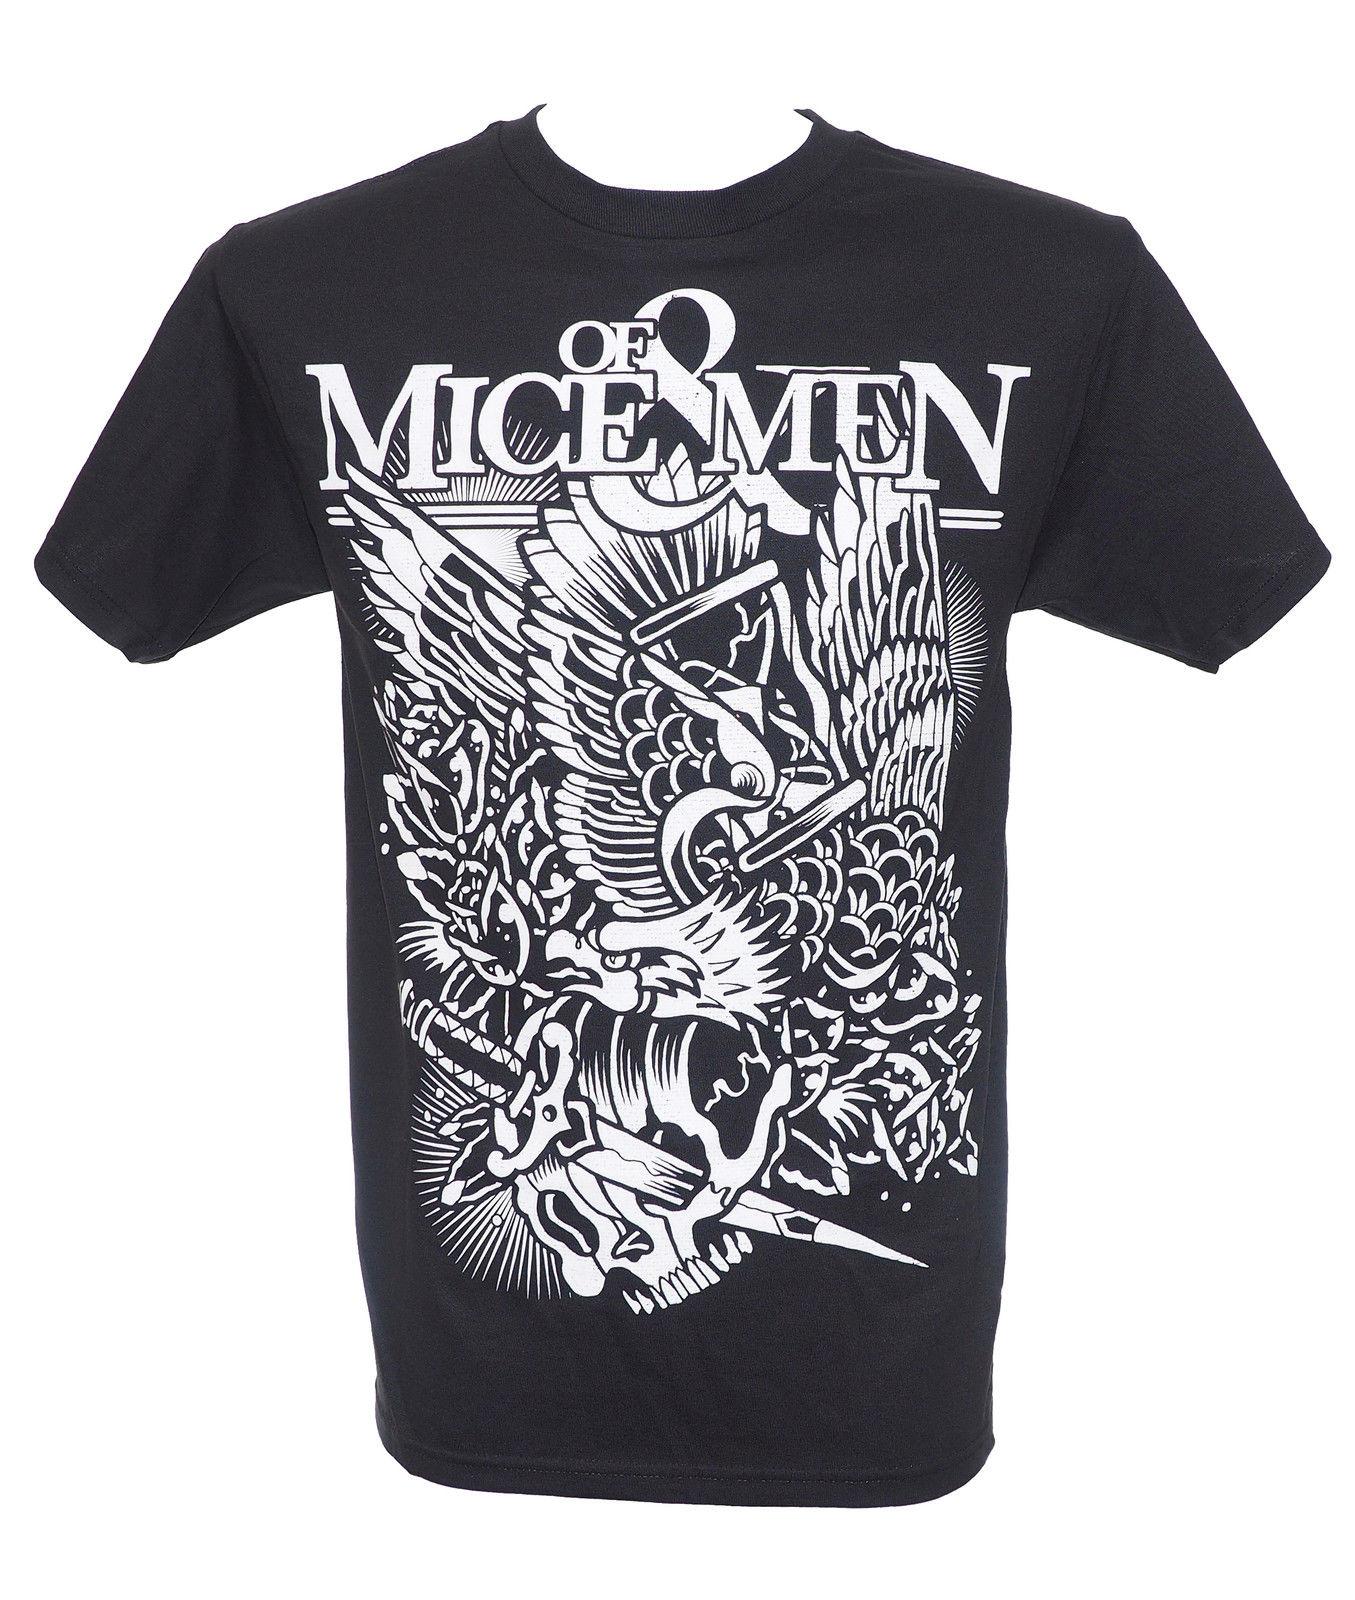 Of Mice & Men Eagle Official Licensed T Shirt New M - Mice And Men Tee , HD Wallpaper & Backgrounds